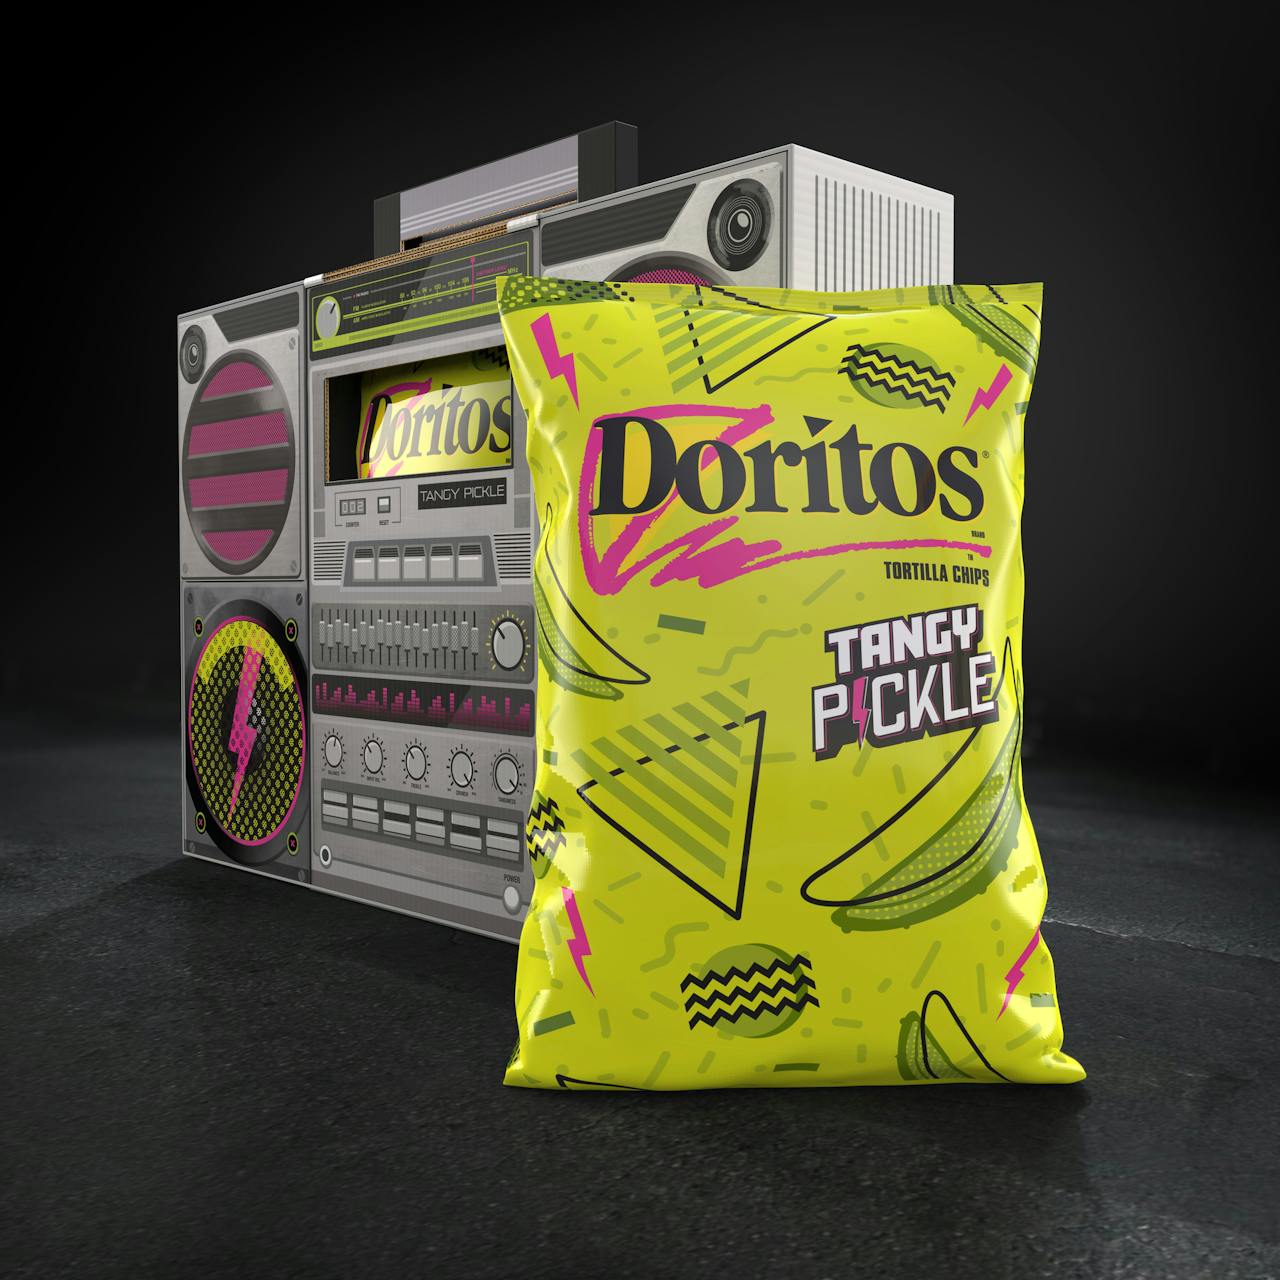 From flashy geometric shapes and lines to neon hues, Doritos' limited edition tangy pickle flavor design exudes the intensity for which Memphis Design is known.  Image credit: Doritos